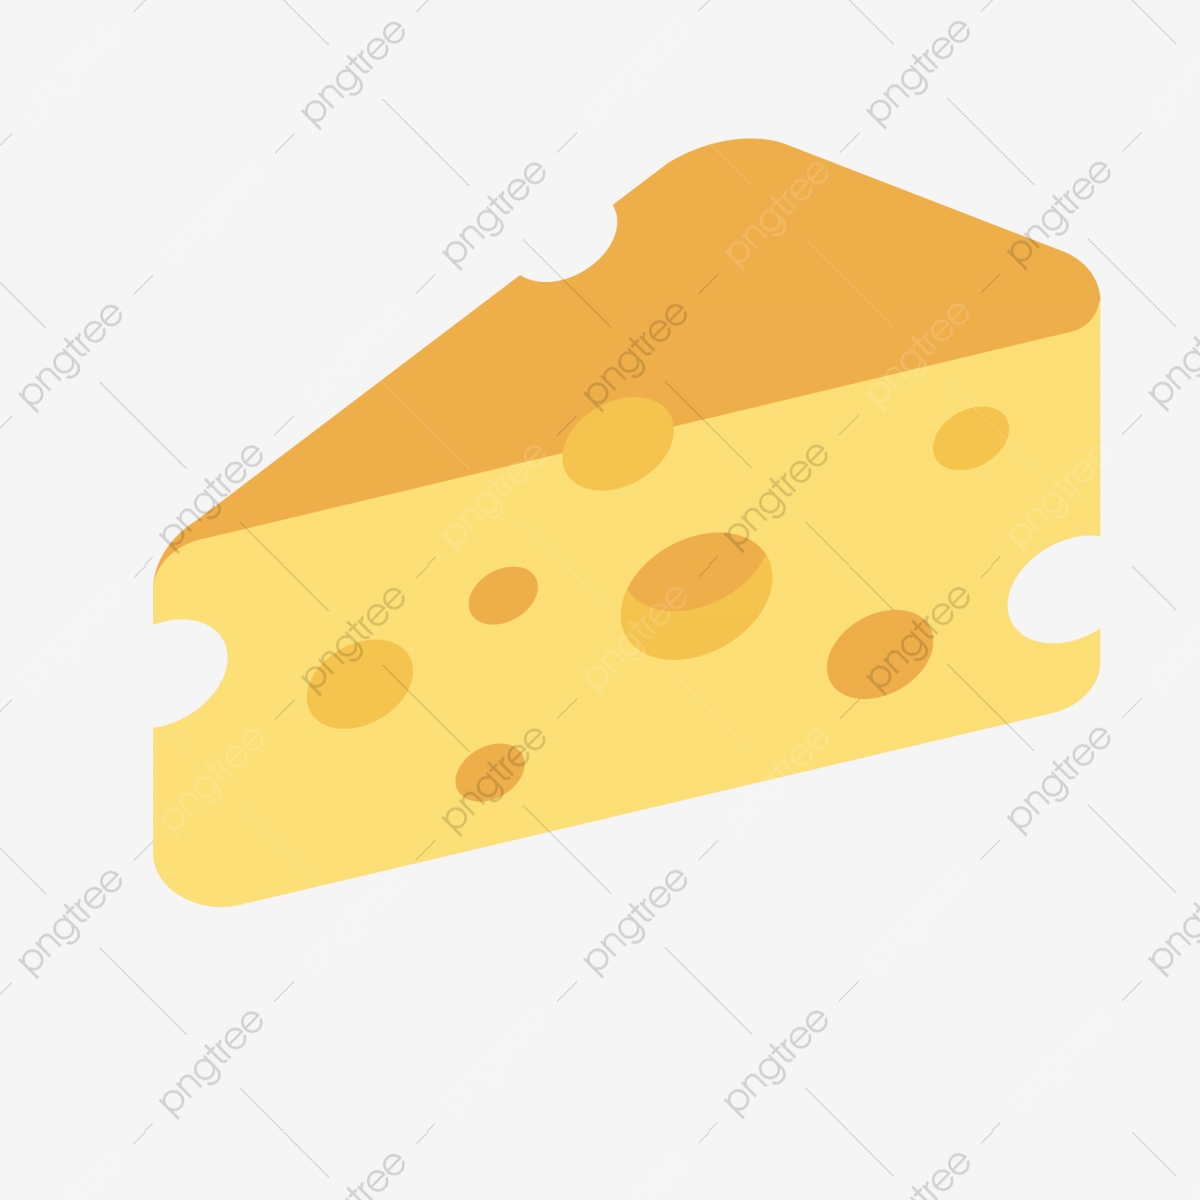 Dairy clipart yello. Yellow cheese png transparent